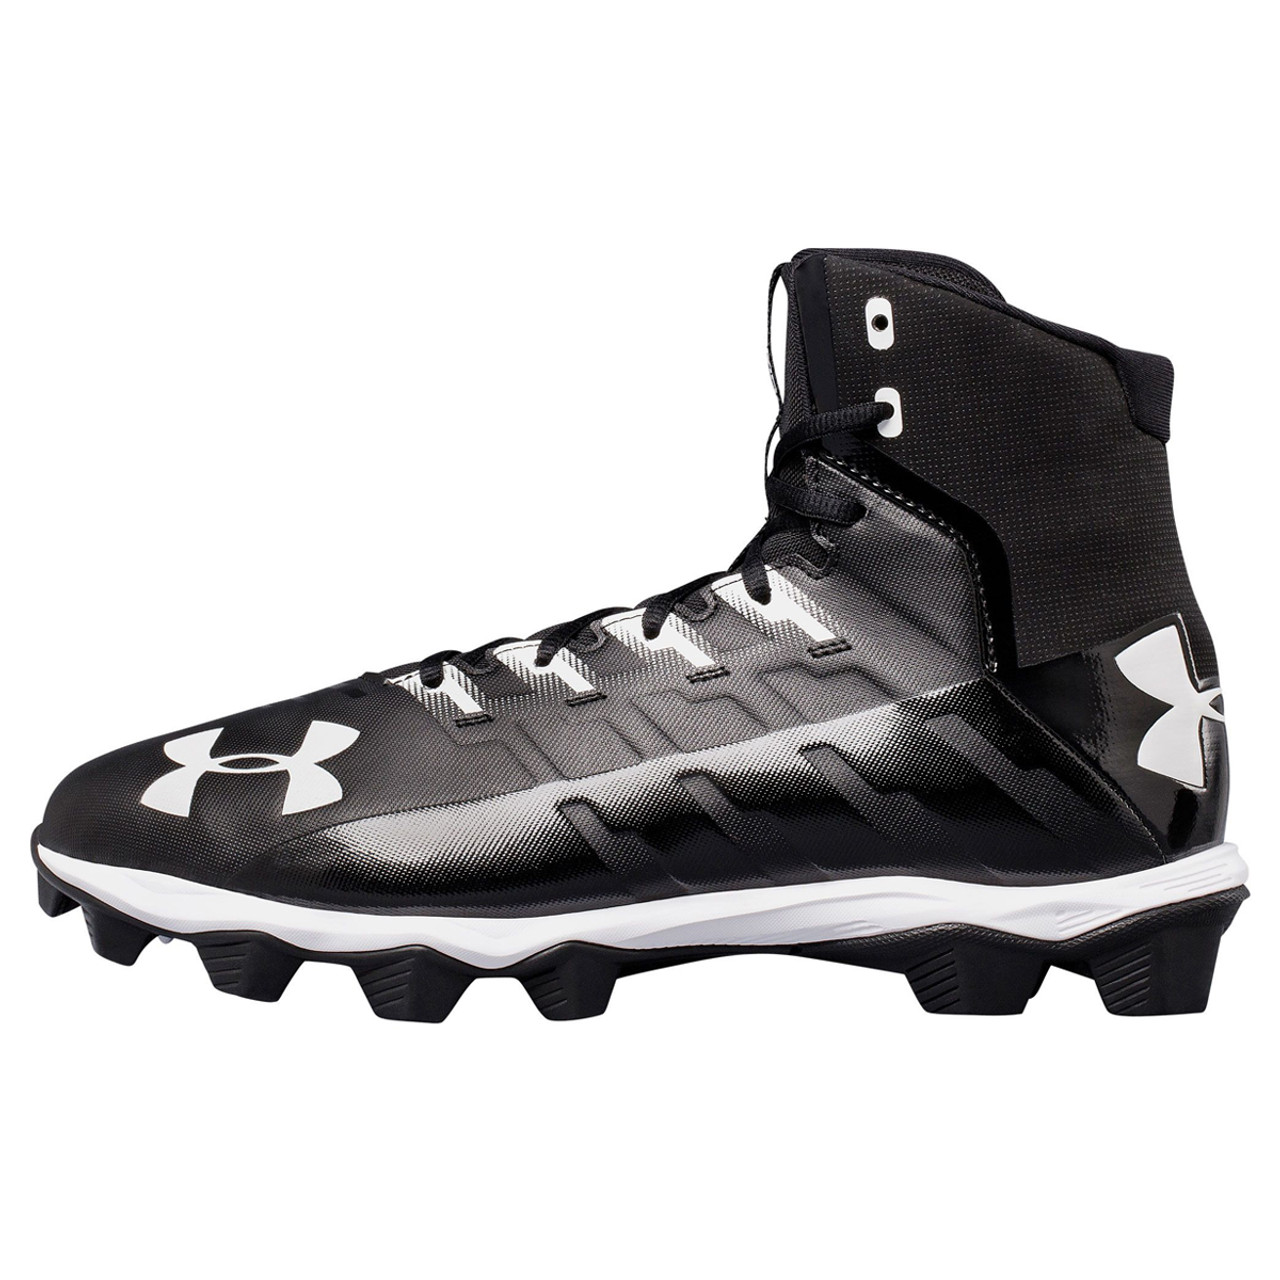 Buy > under armour football cleats wide width > in stock